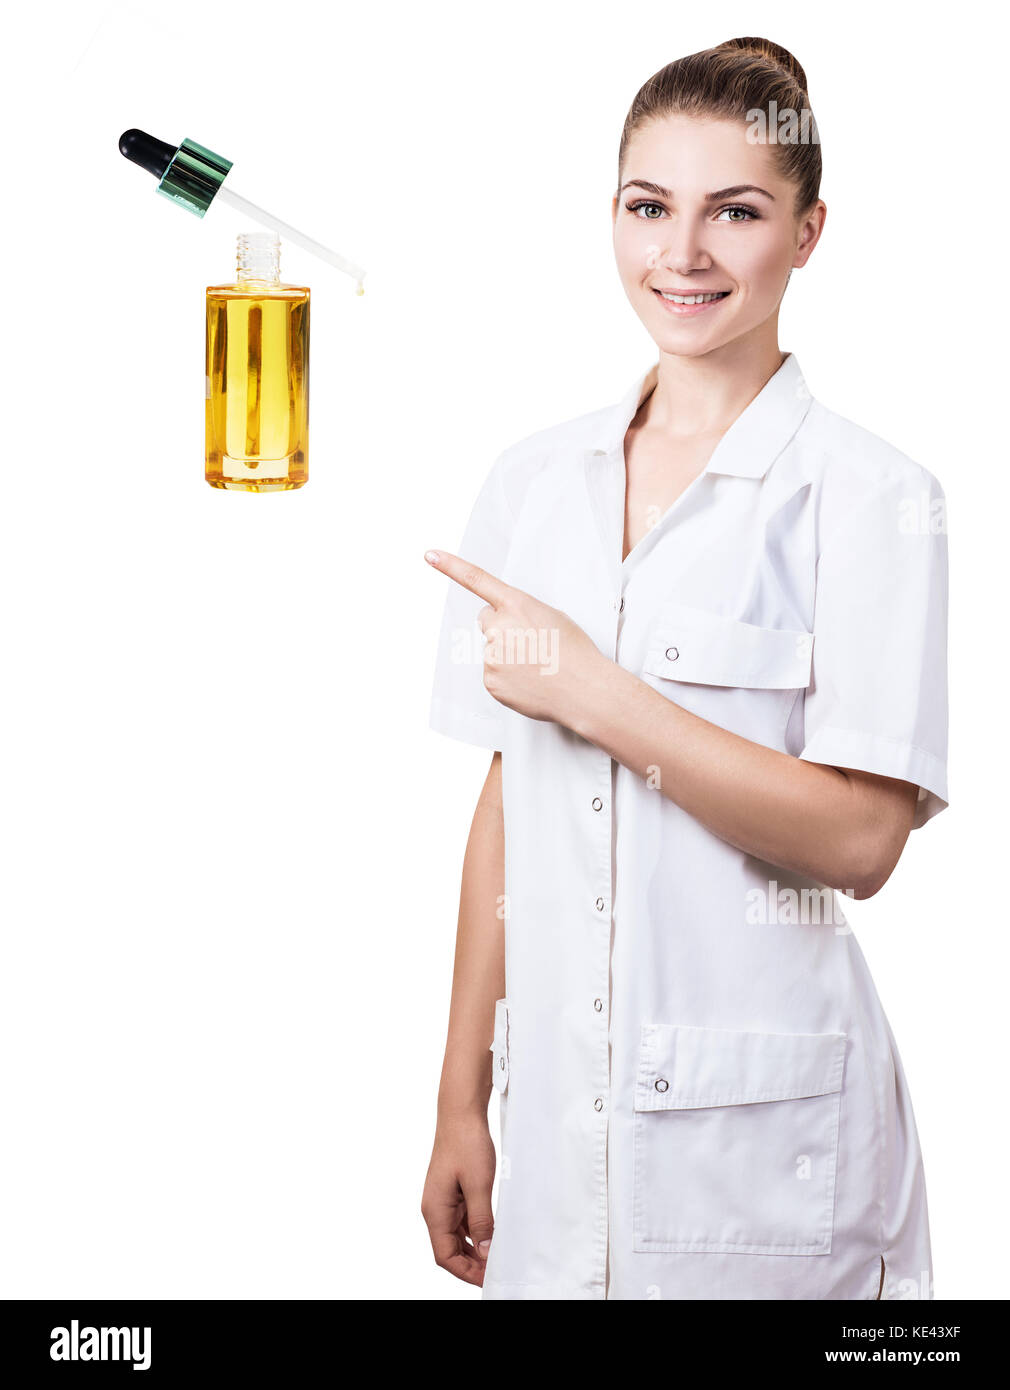 Young cosmetologist woman presents cosmetics oil. Stock Photo